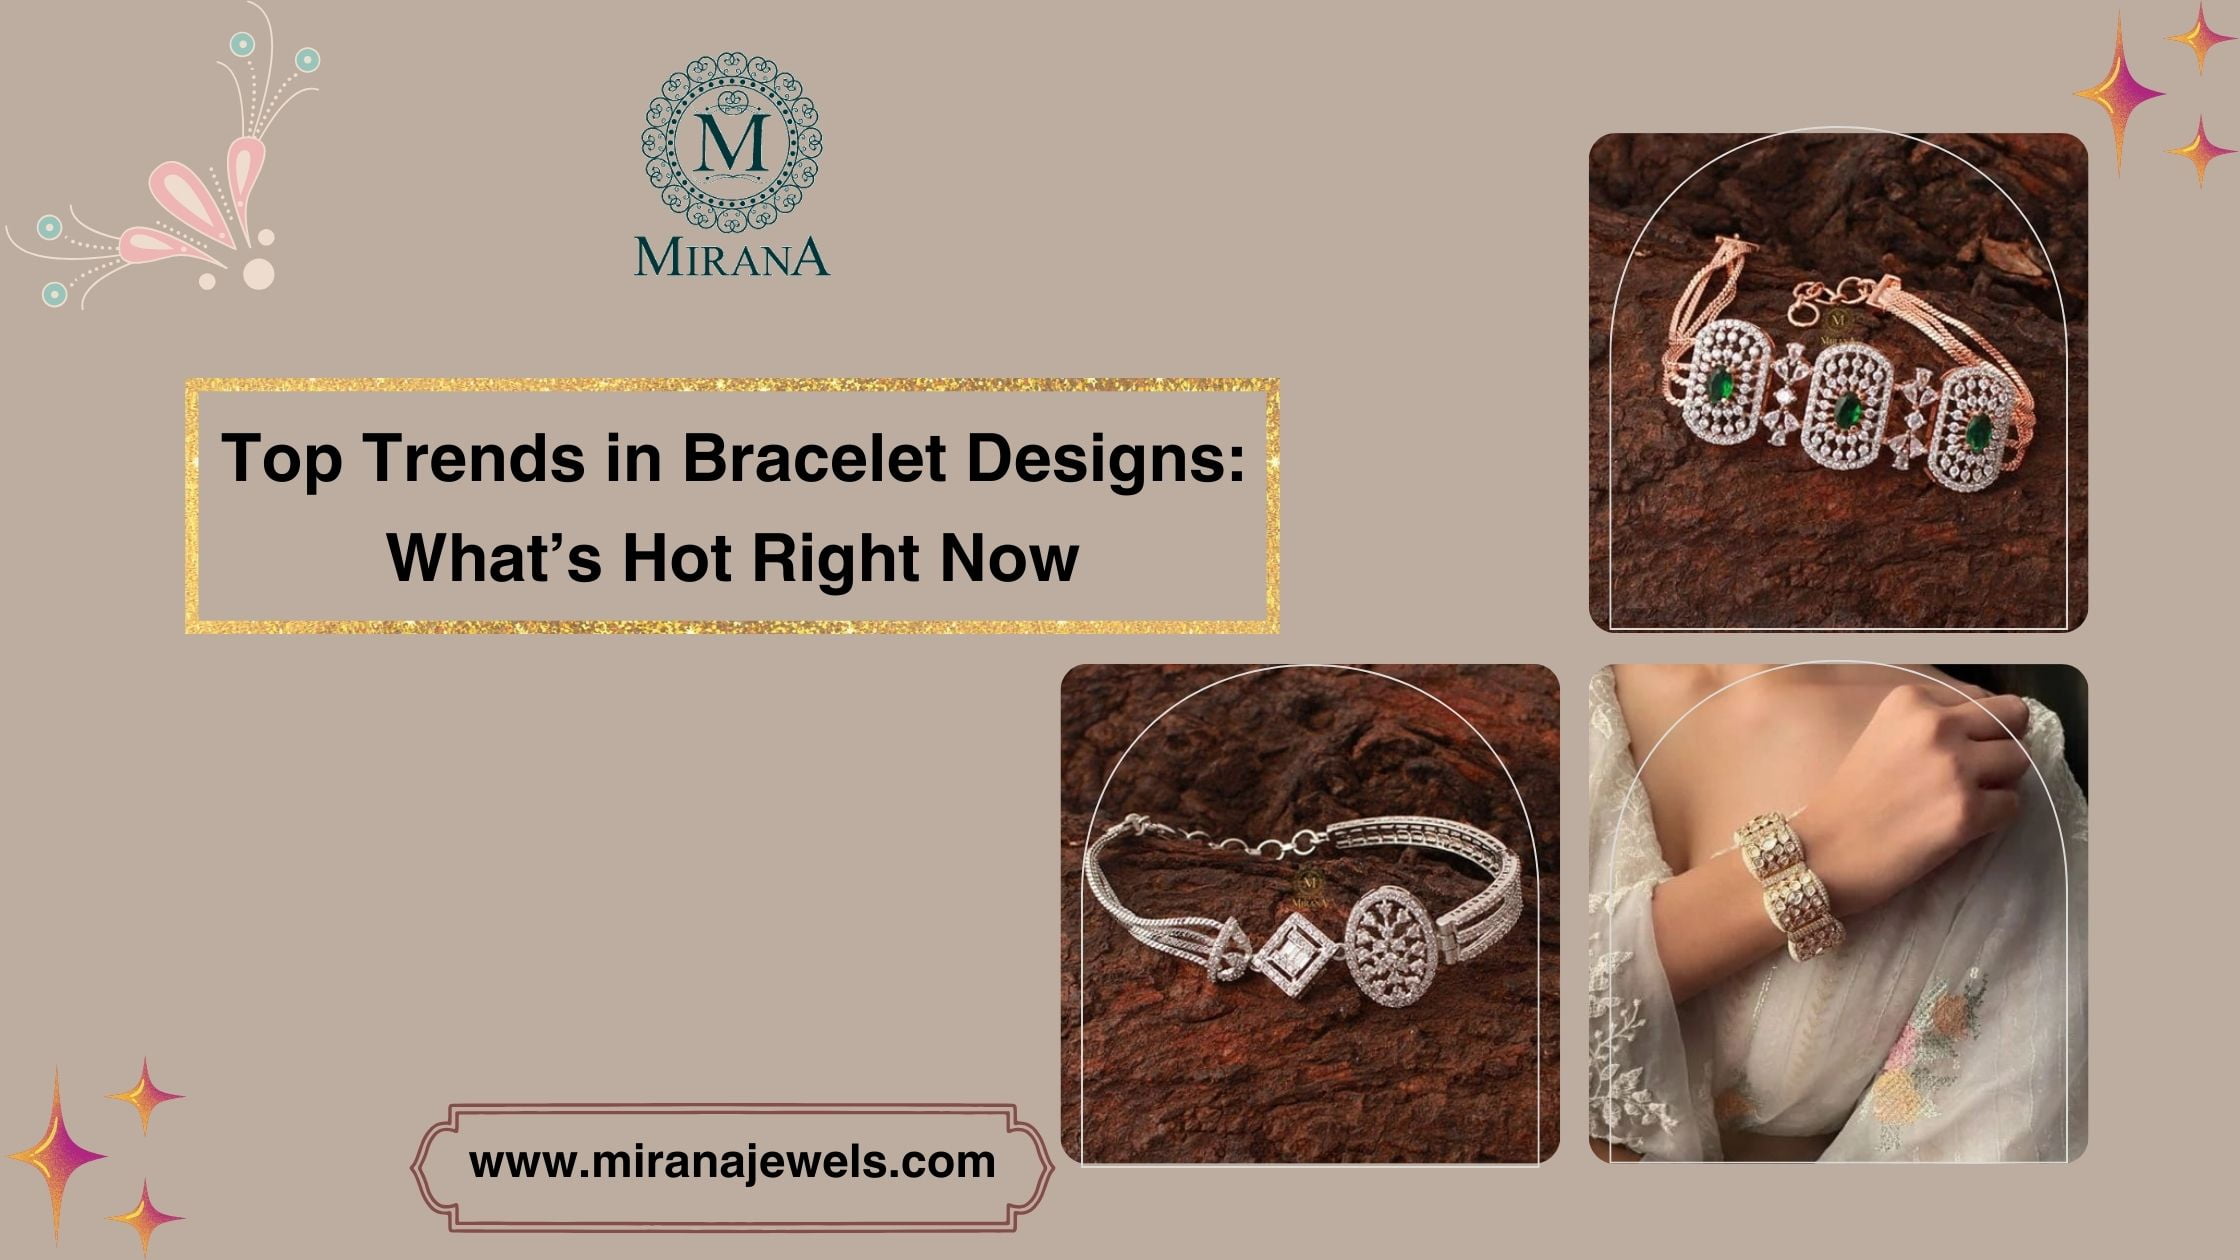 Top Trends in Bracelet Designs: What’s Hot Right Now